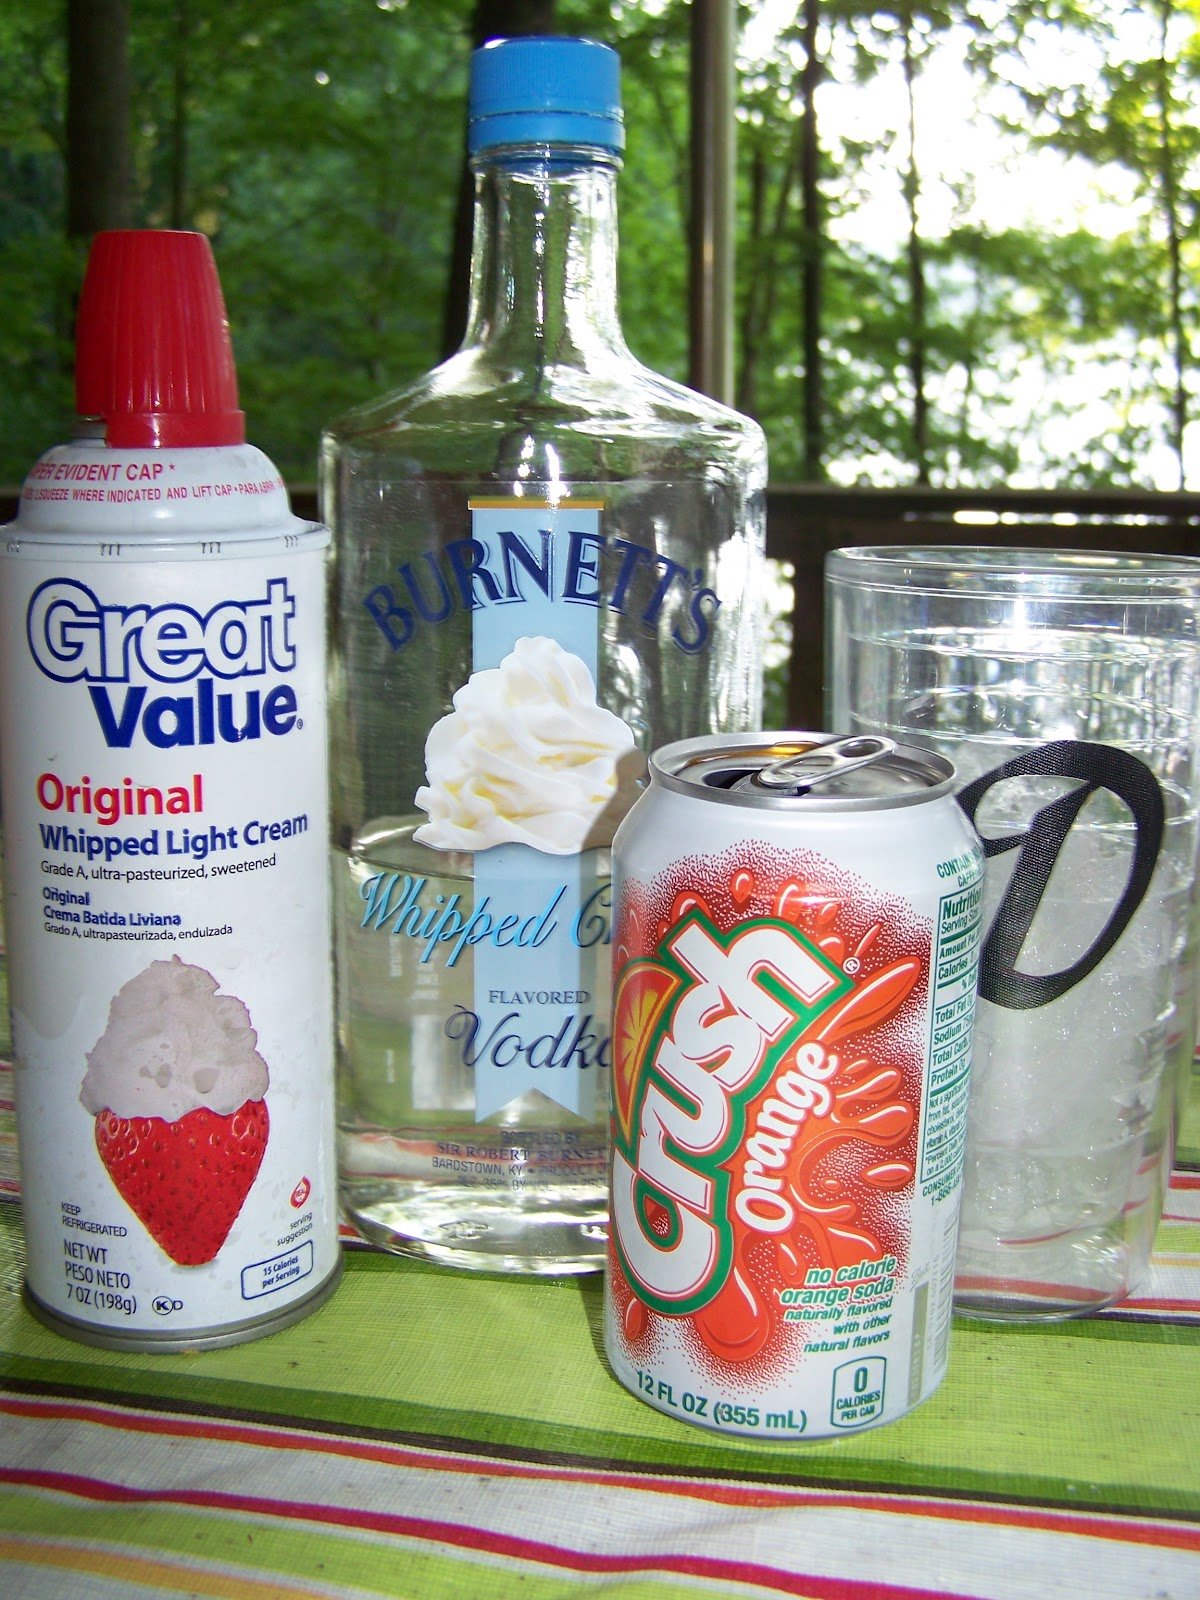 Man That Stuff Is Good!: Whipped Cream Vodka Creamsicle